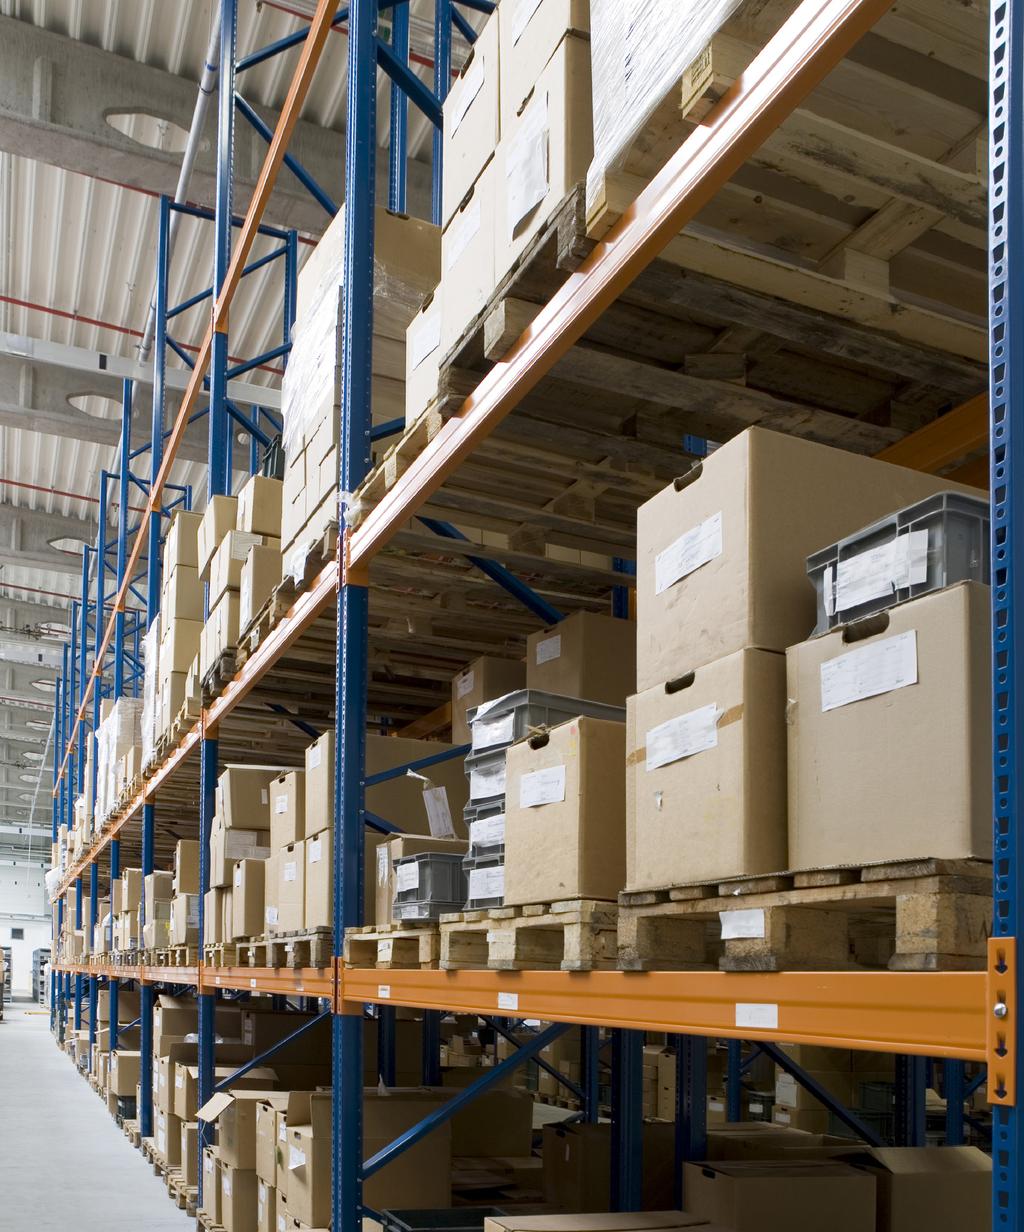 Vision Inventory management with the intelligence to help you